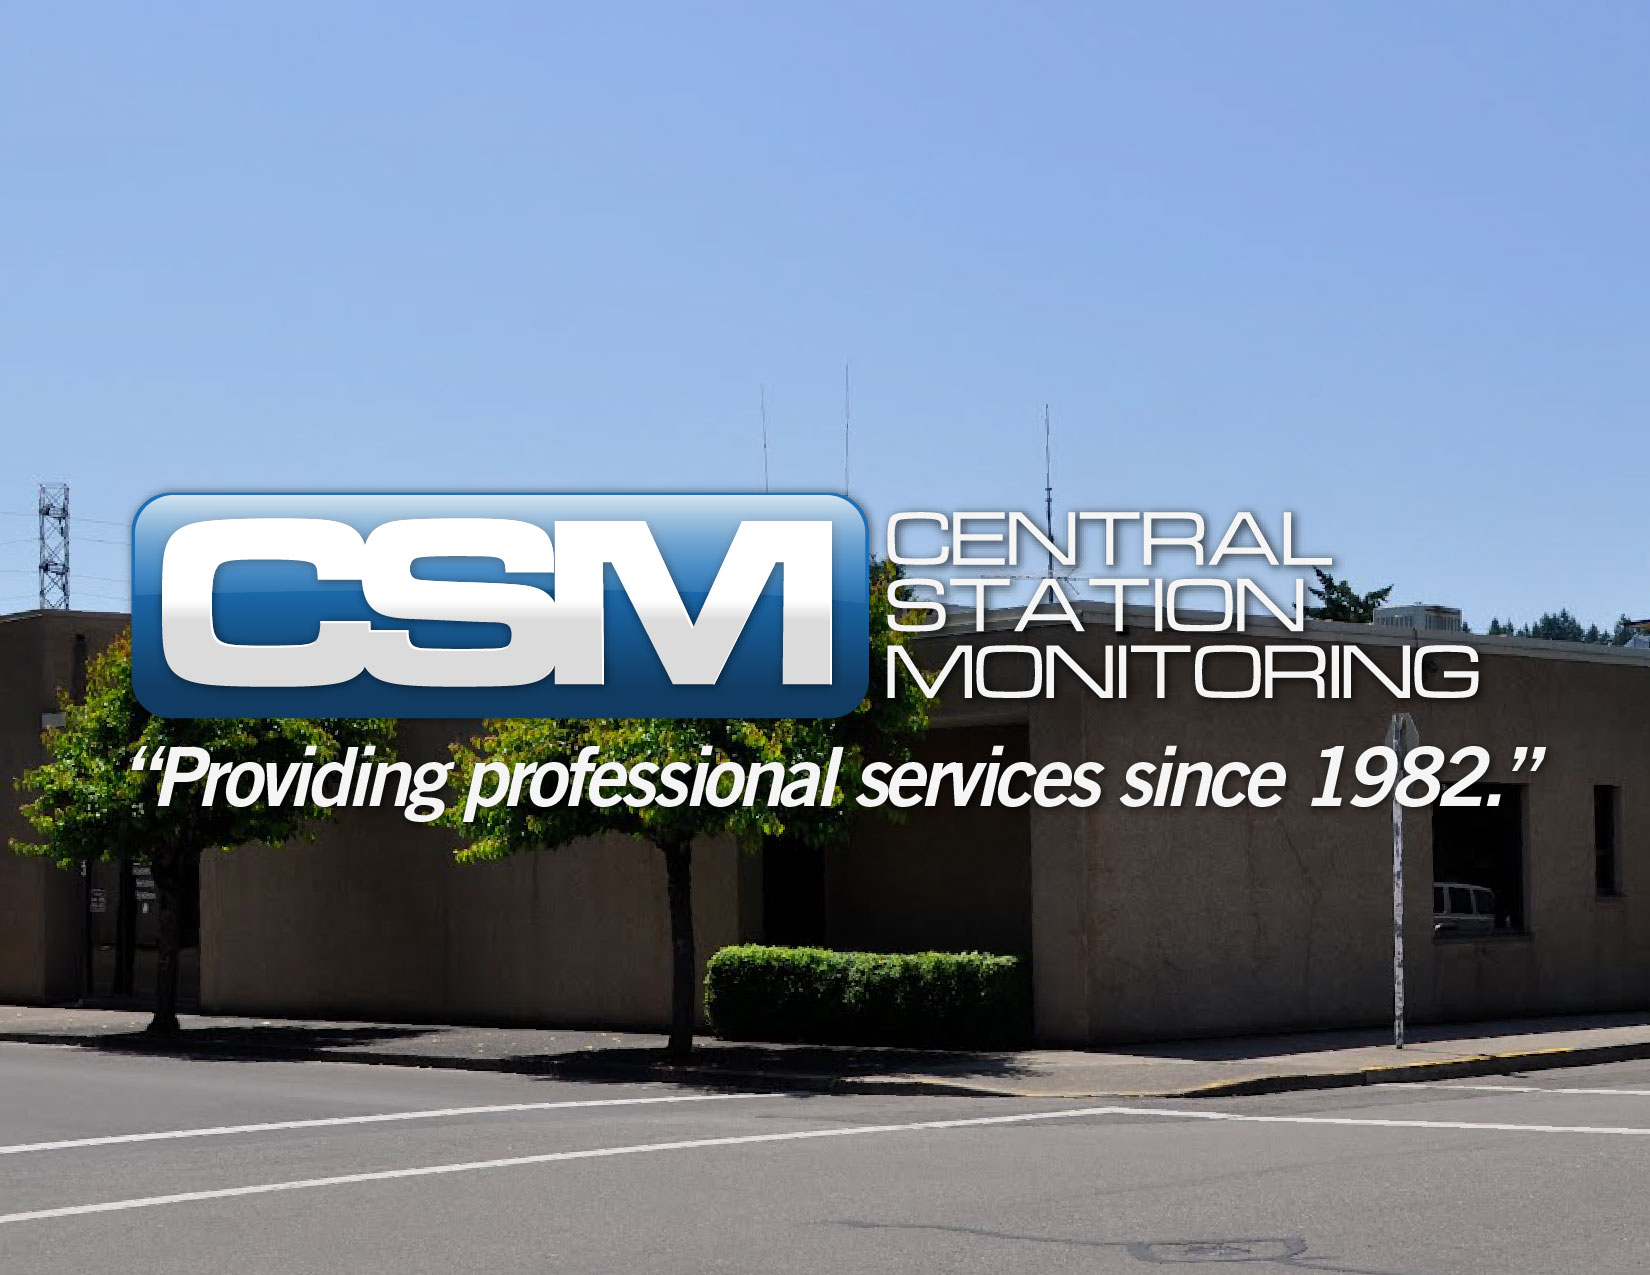 central station monitoring companies